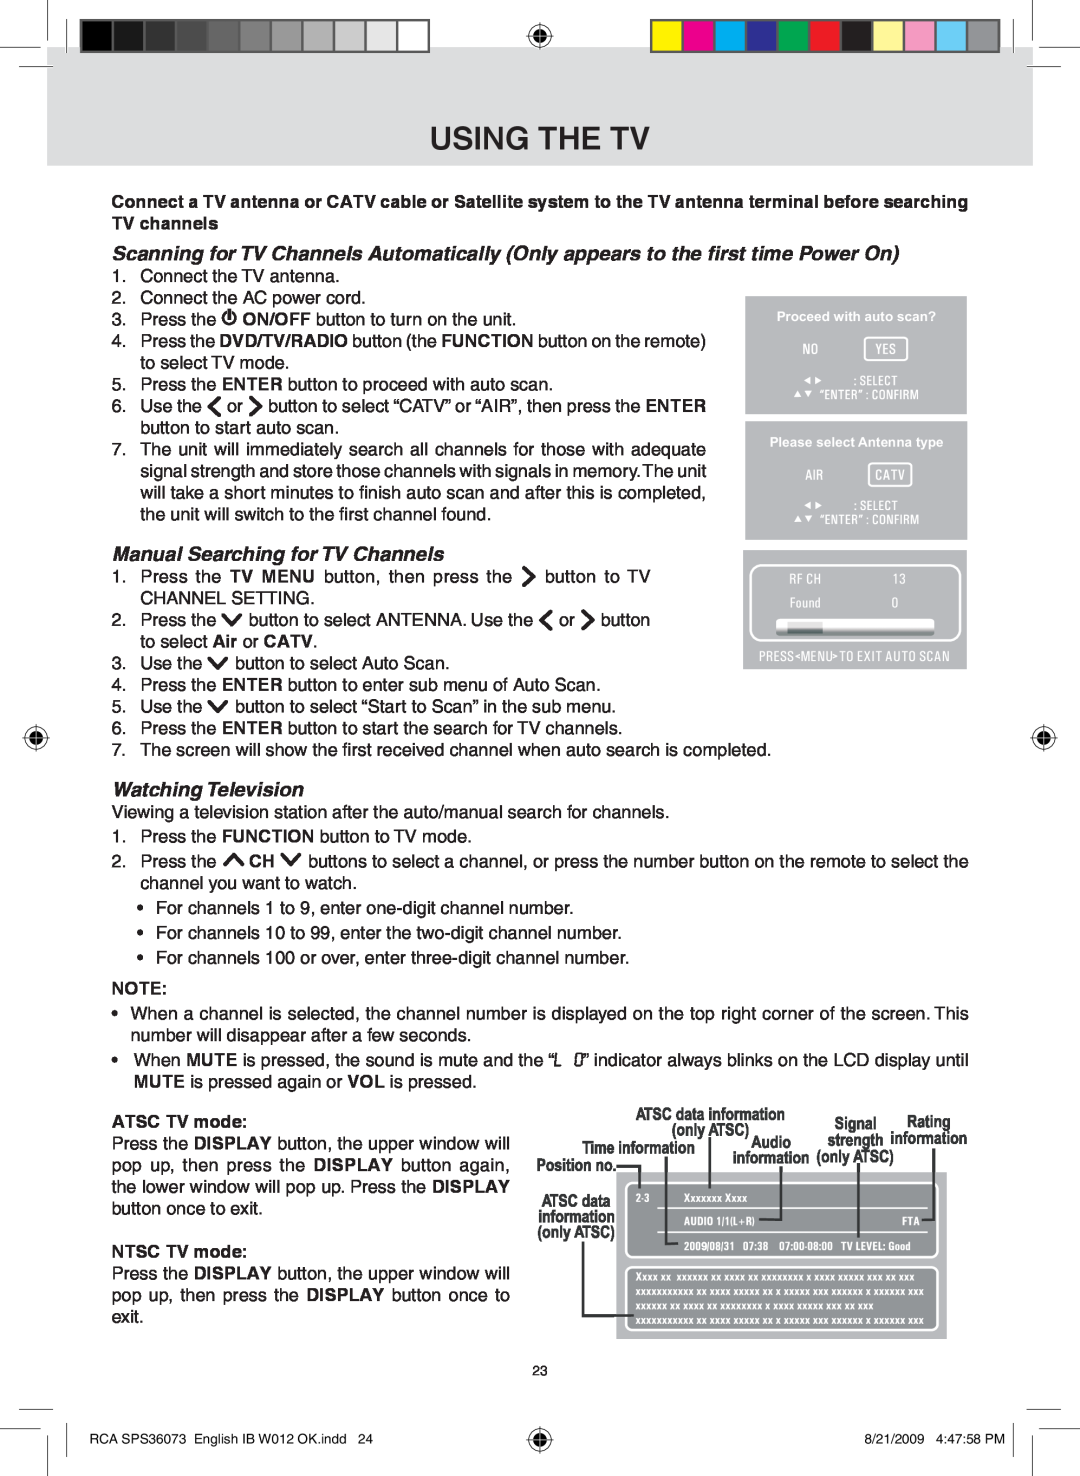 RCA SPS36073 owner manual using the TV, Manual searching for TV channels, Watching television 